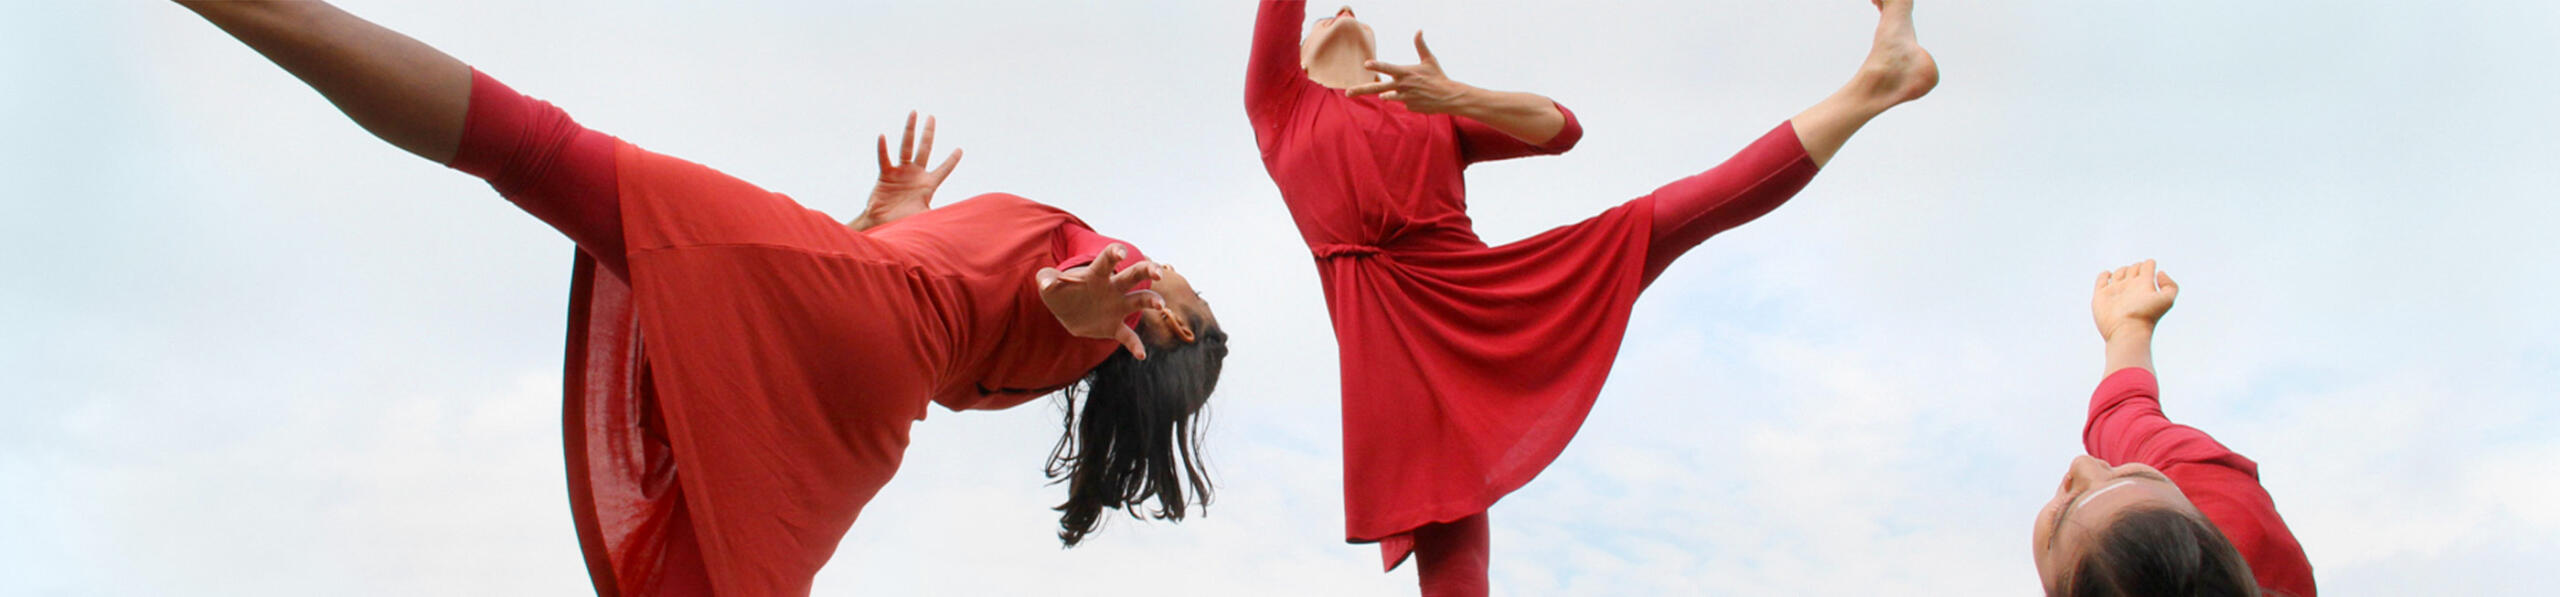 three dancers caught mid-motion in red dance costumes agains the sky